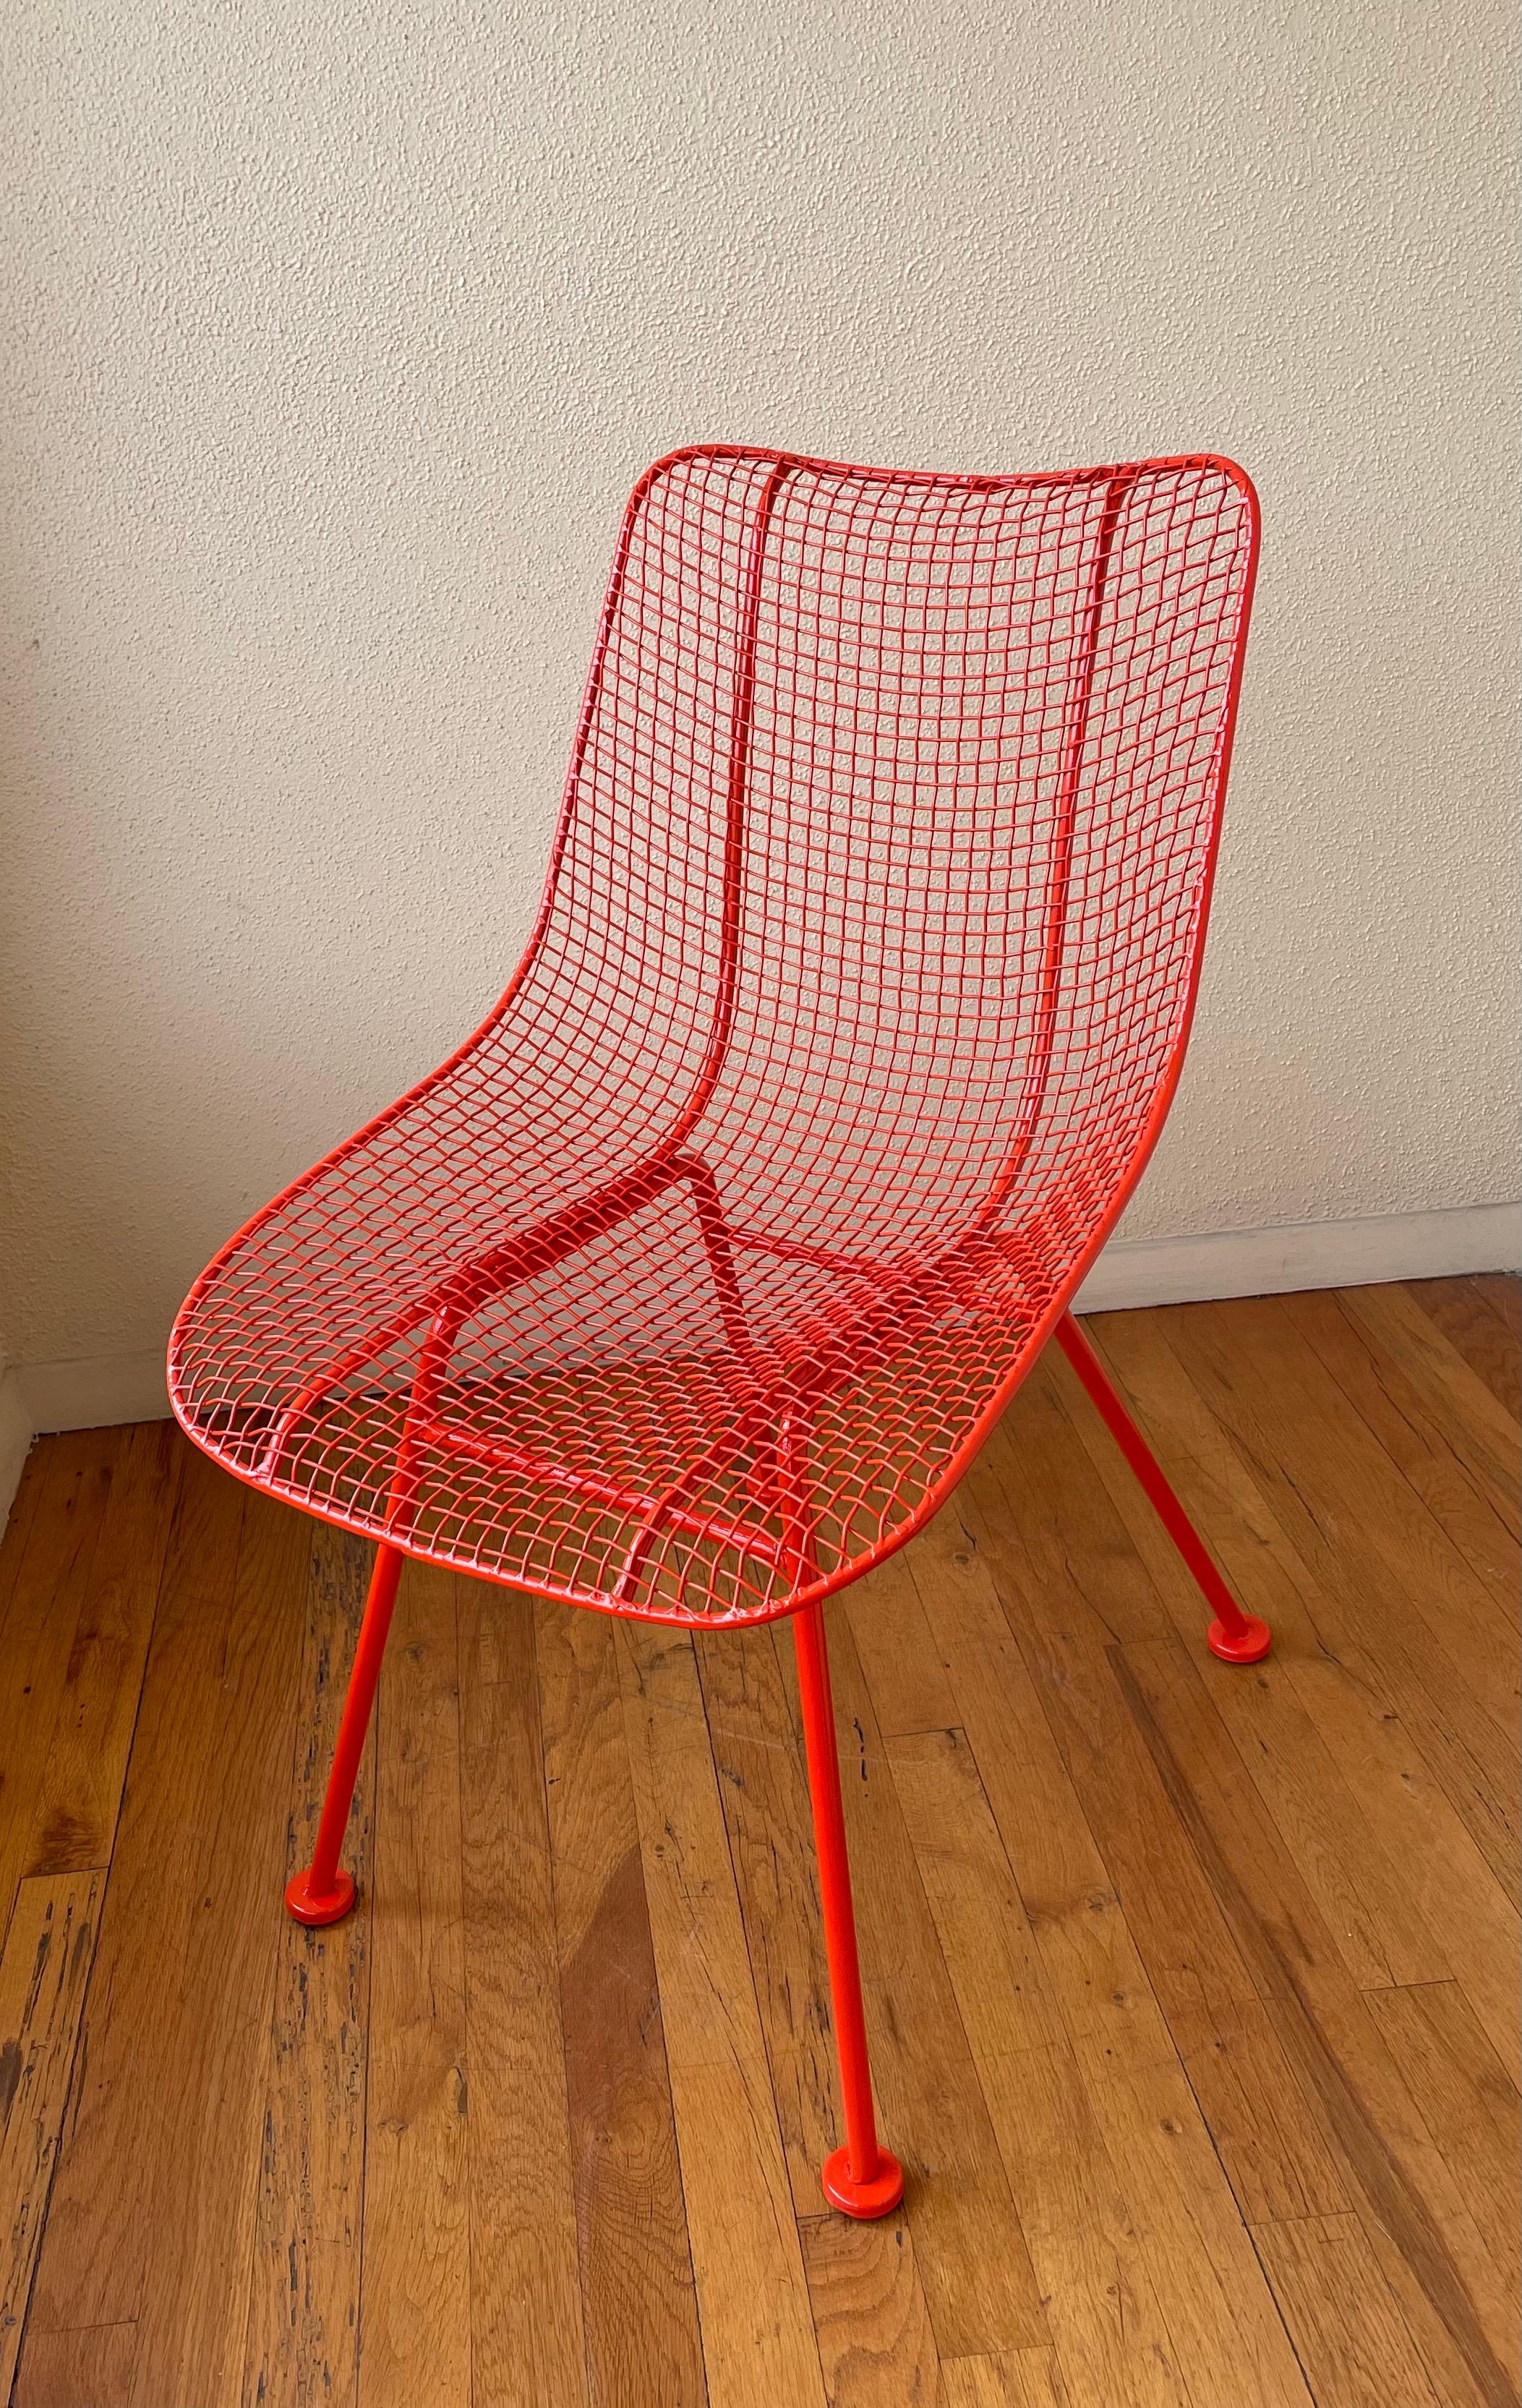 Powder-Coated American Mid-Century Modern Sulptura Chair Design by Russell Woodard For Sale